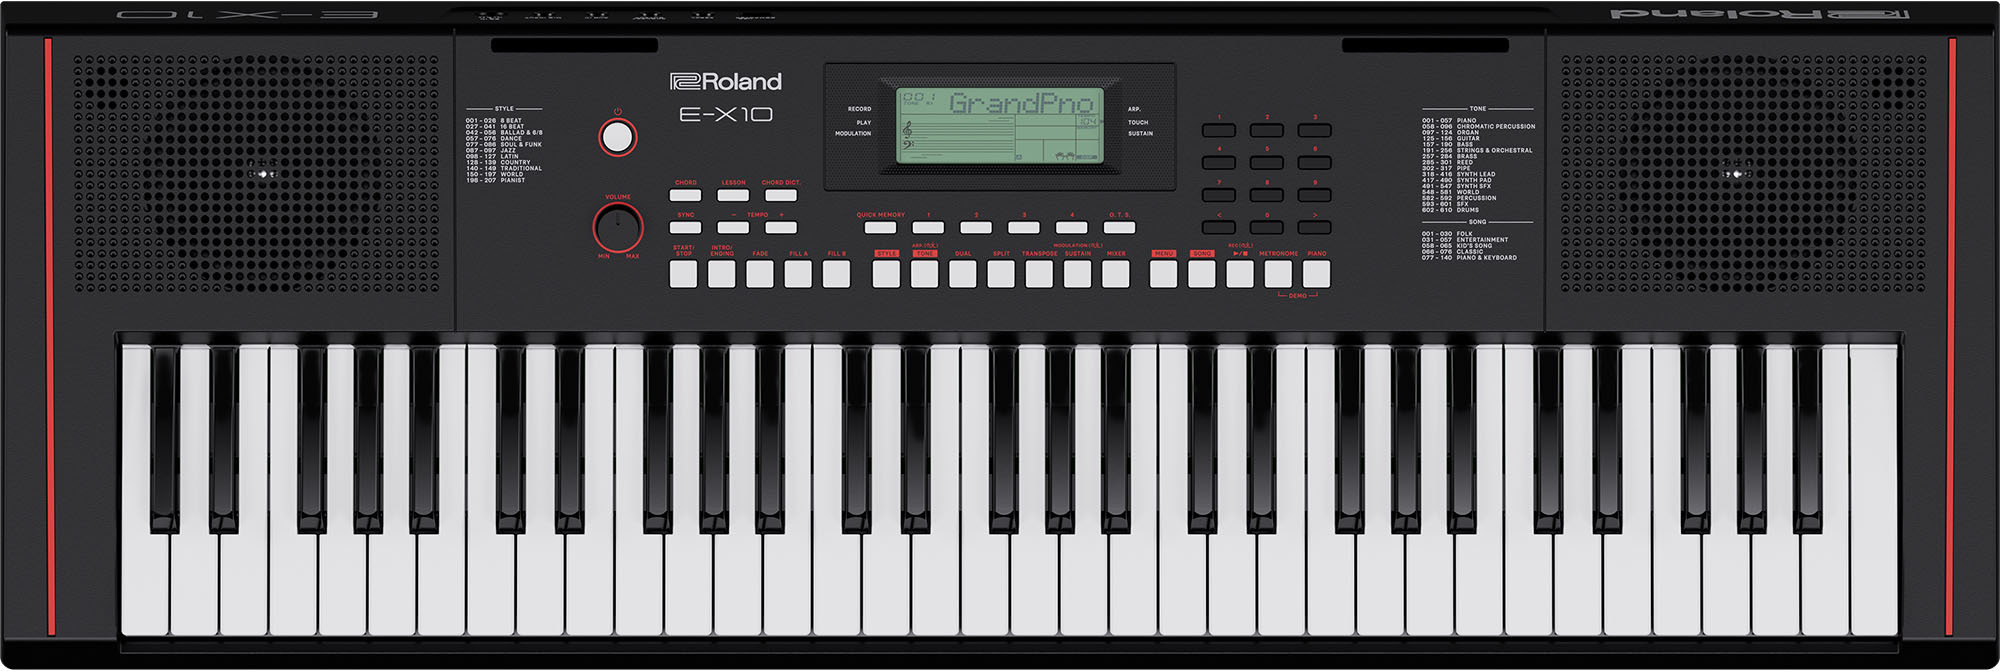 Roland E-x10 - Entertainer Keyboard - Main picture